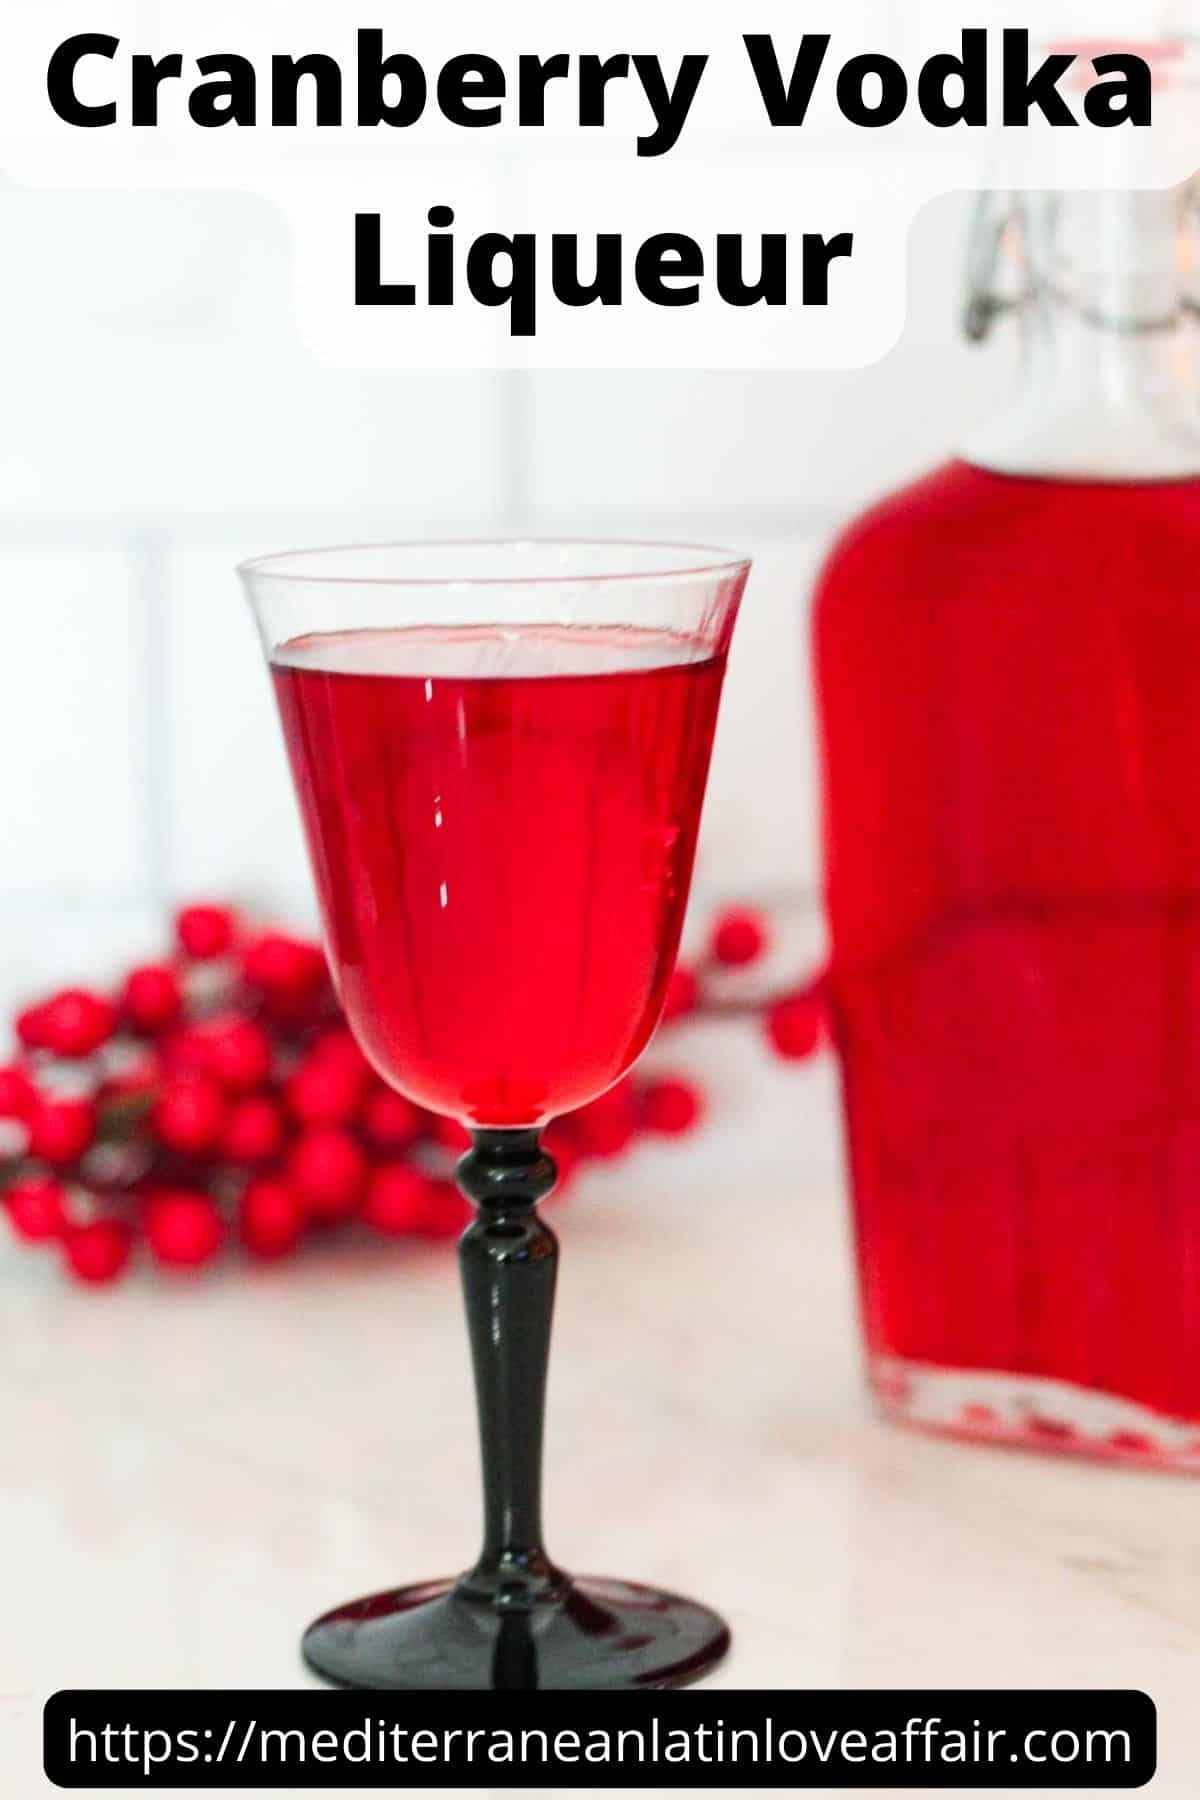 An image created for Pinterest. It shows the picture of a bottle of cranberry liqueur and a glass with liqueur in it. Then there's a title bar with the name of the liqueur and a bottom bar with the website link. 